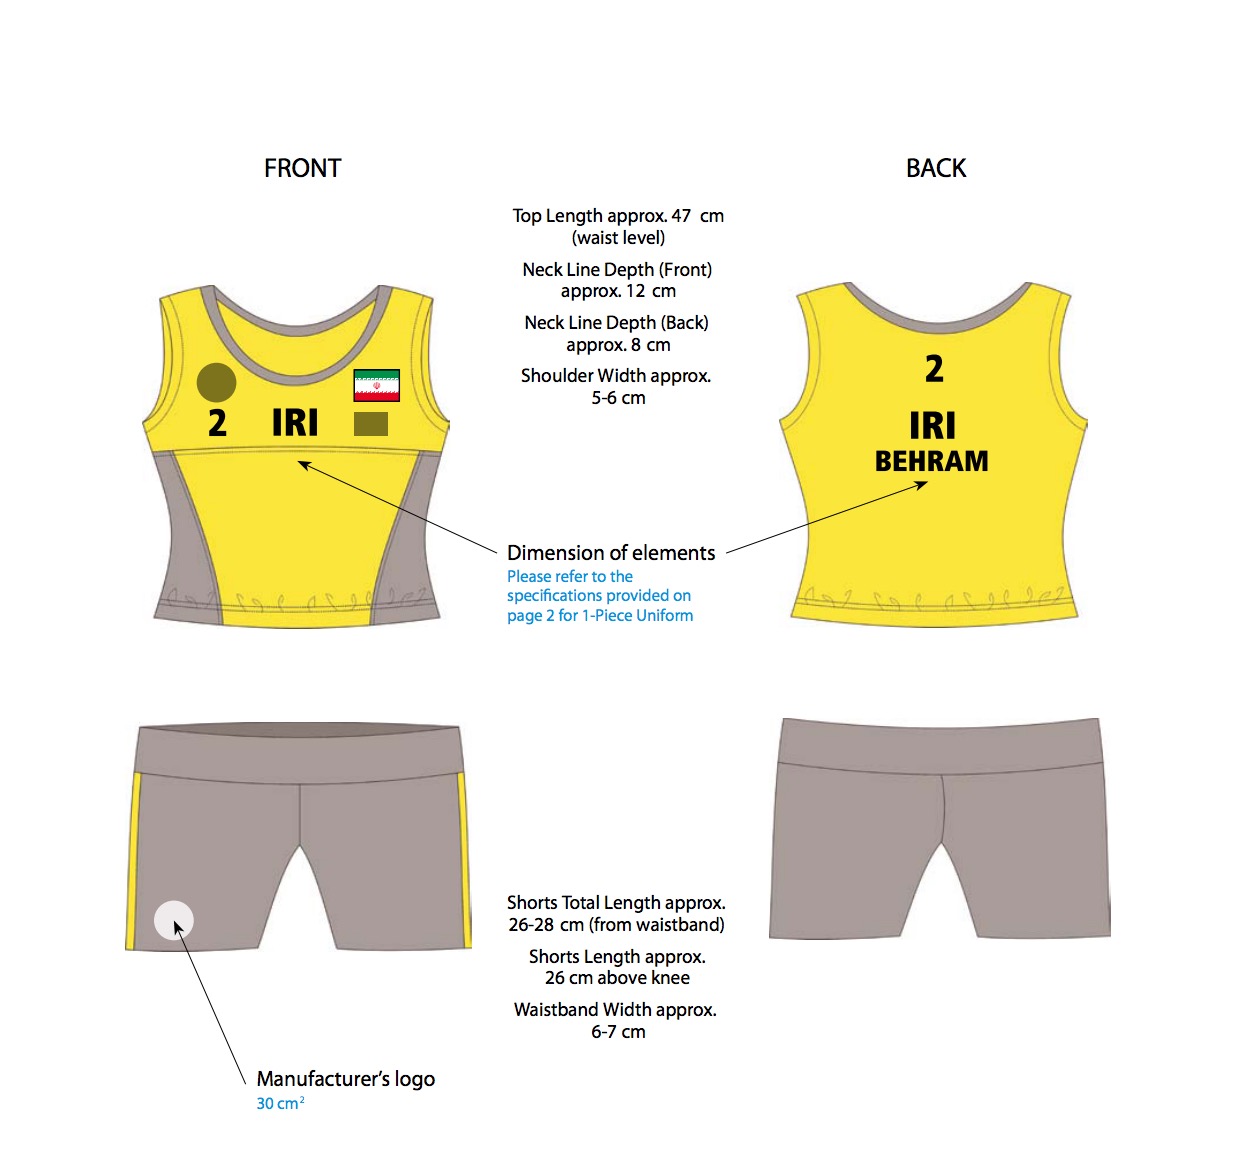 Competitors Explain Beach Volleyball Clothing